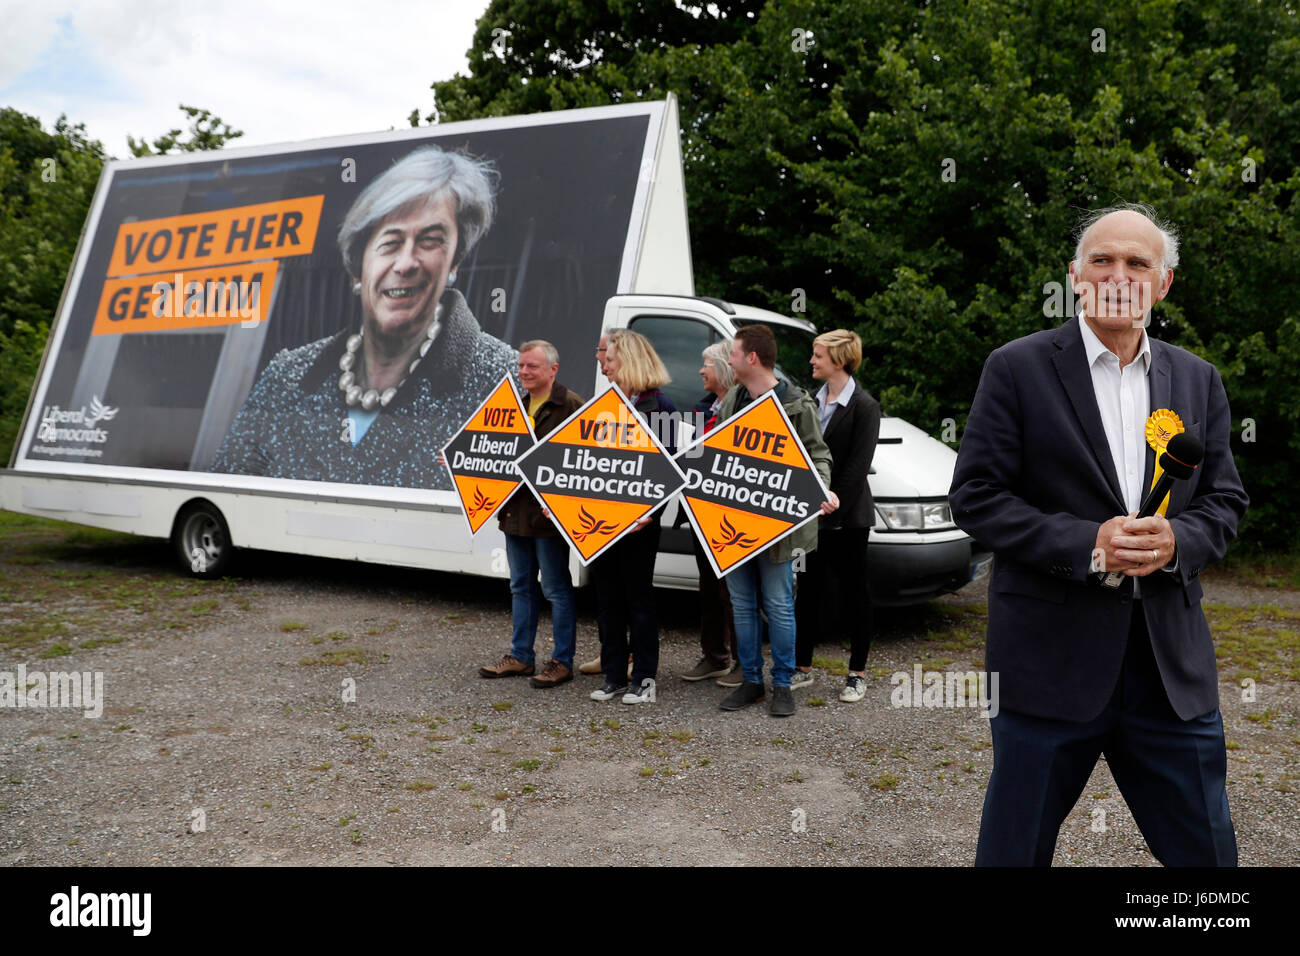 Liberal Democrat candidate Vince Cable out campaigning in Twickenham ahead of Britain's upcoming General Election in June 2017 Stock Photo